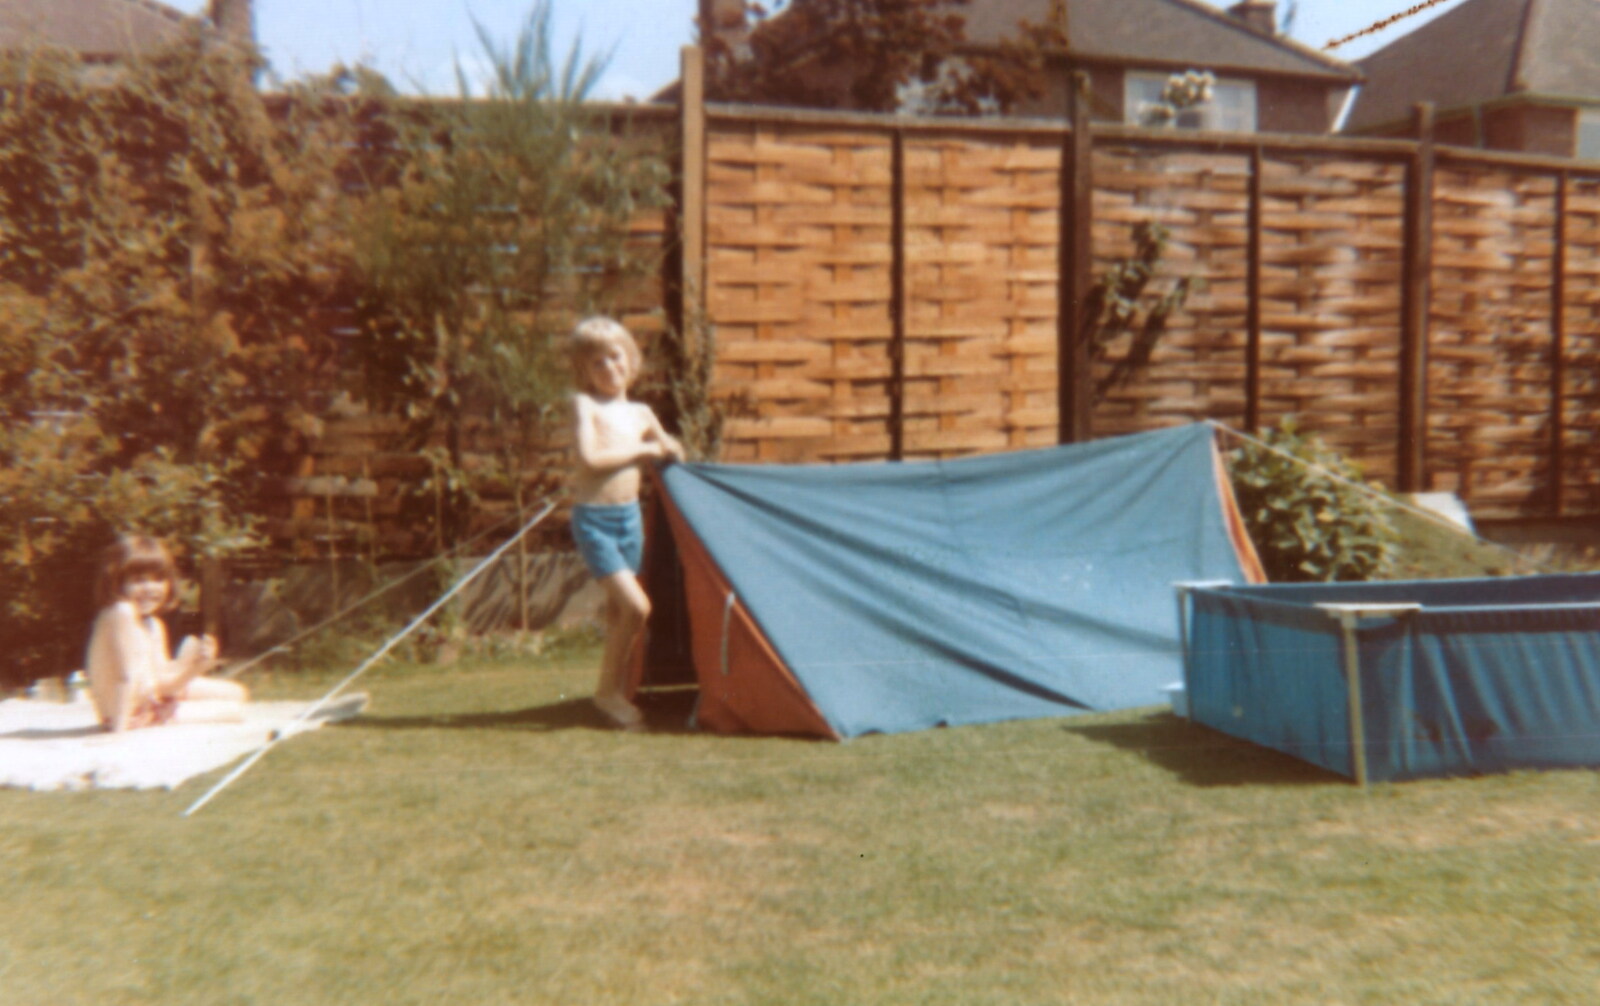 Family History: Birtle's Close, Sandbach, Cheshire - 24th January 2020: The tent in a garden (which looks like somewhere else)